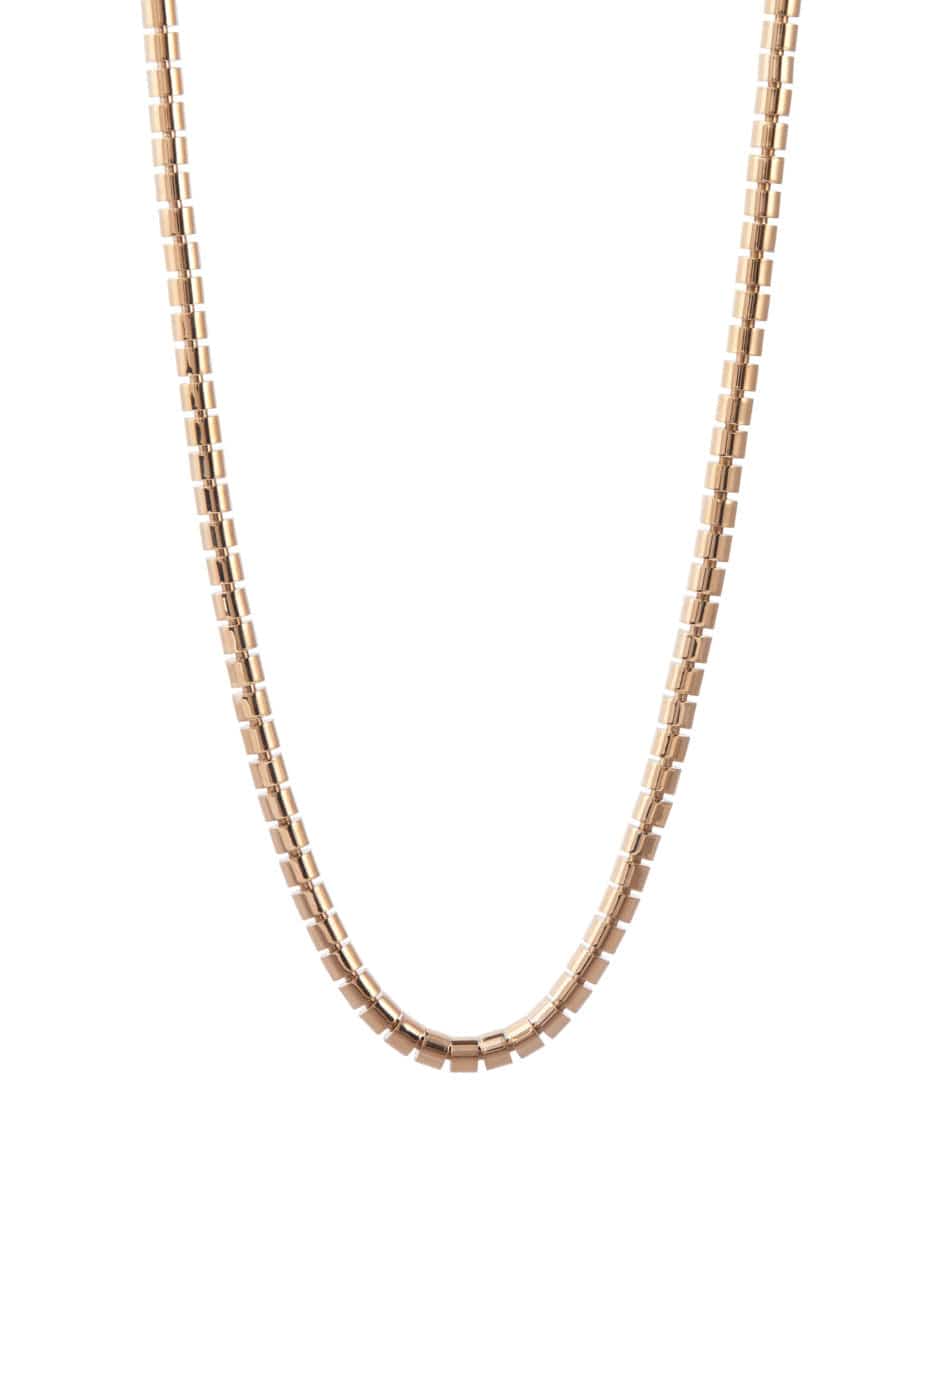 SIDNEY GARBER-Skinny Ophelia Necklace - 14in - Yellow Gold-YELLOW GOLD